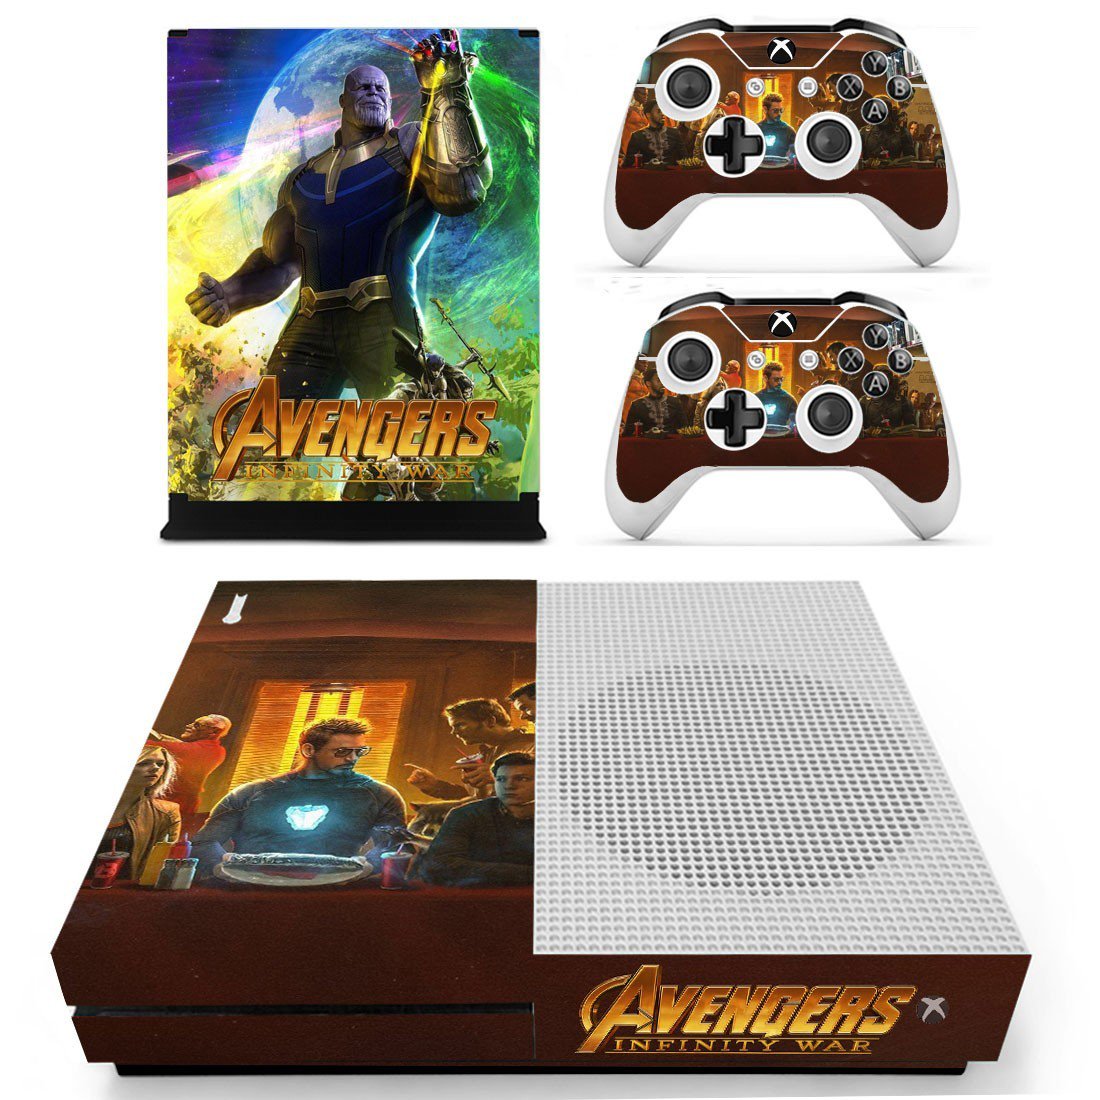 Avengers Infinity War Cover For Xbox One S